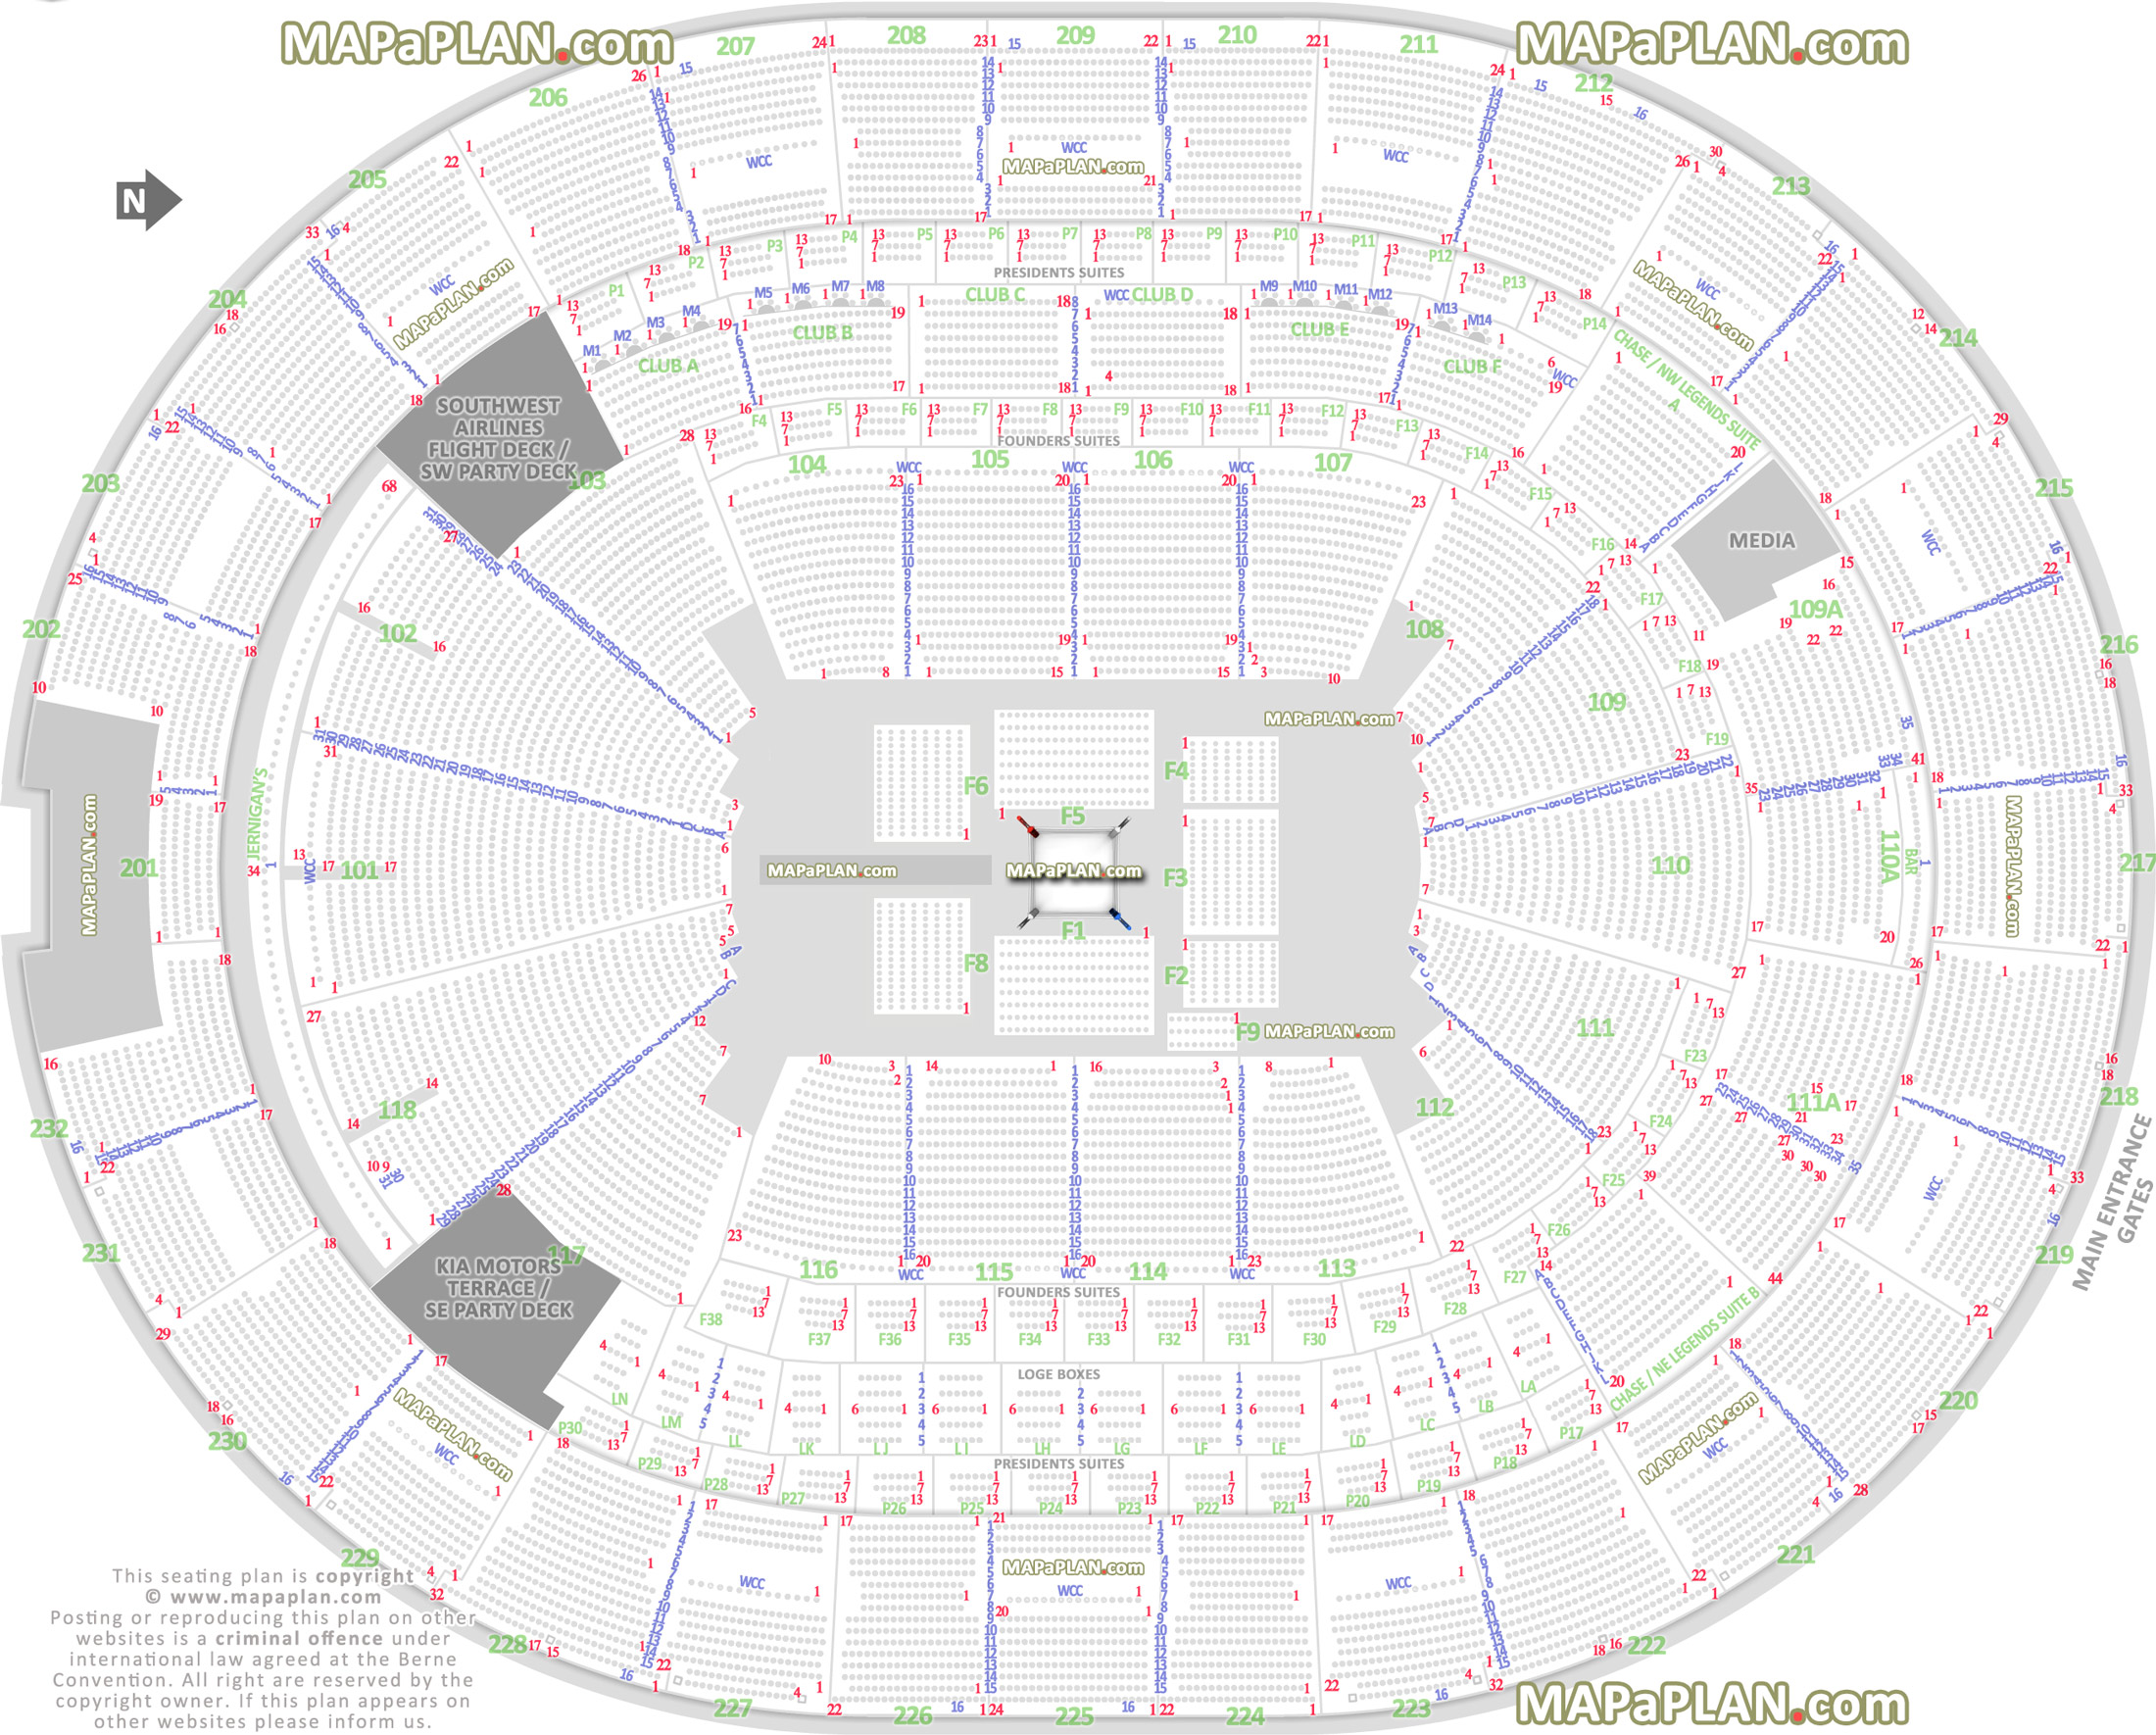 Amway Center Seating Chart With Row Numbers